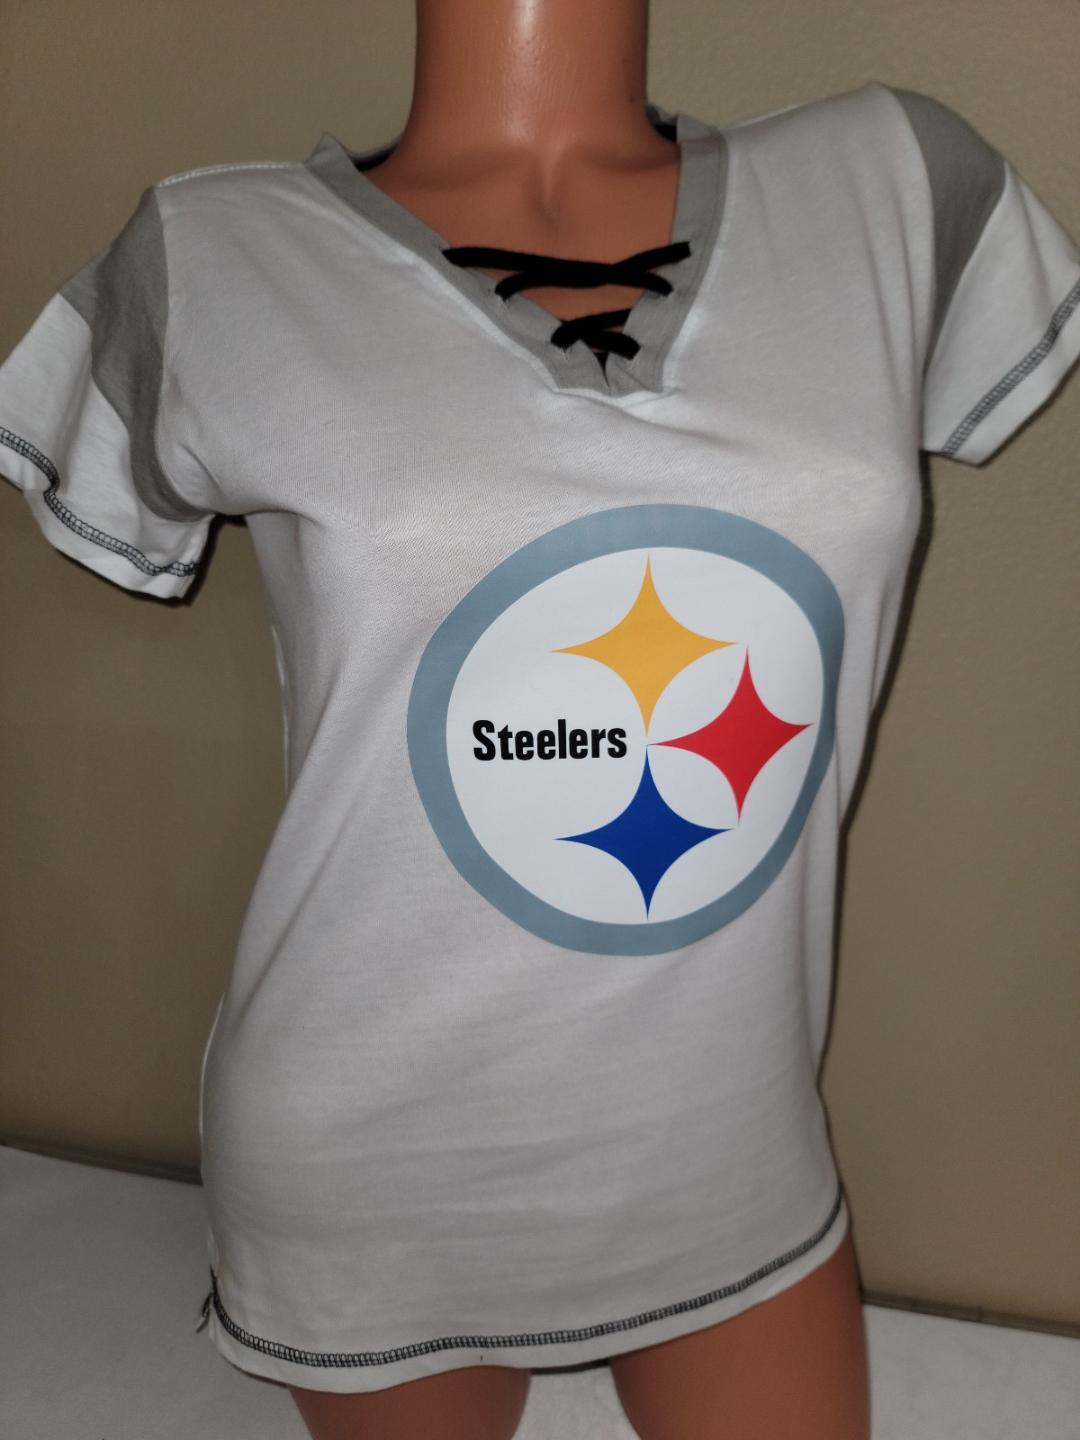 Womens Ladies NFL Team Apparel PITTSBURGH STEELERS "Laces" Football Jersey SHIRT White